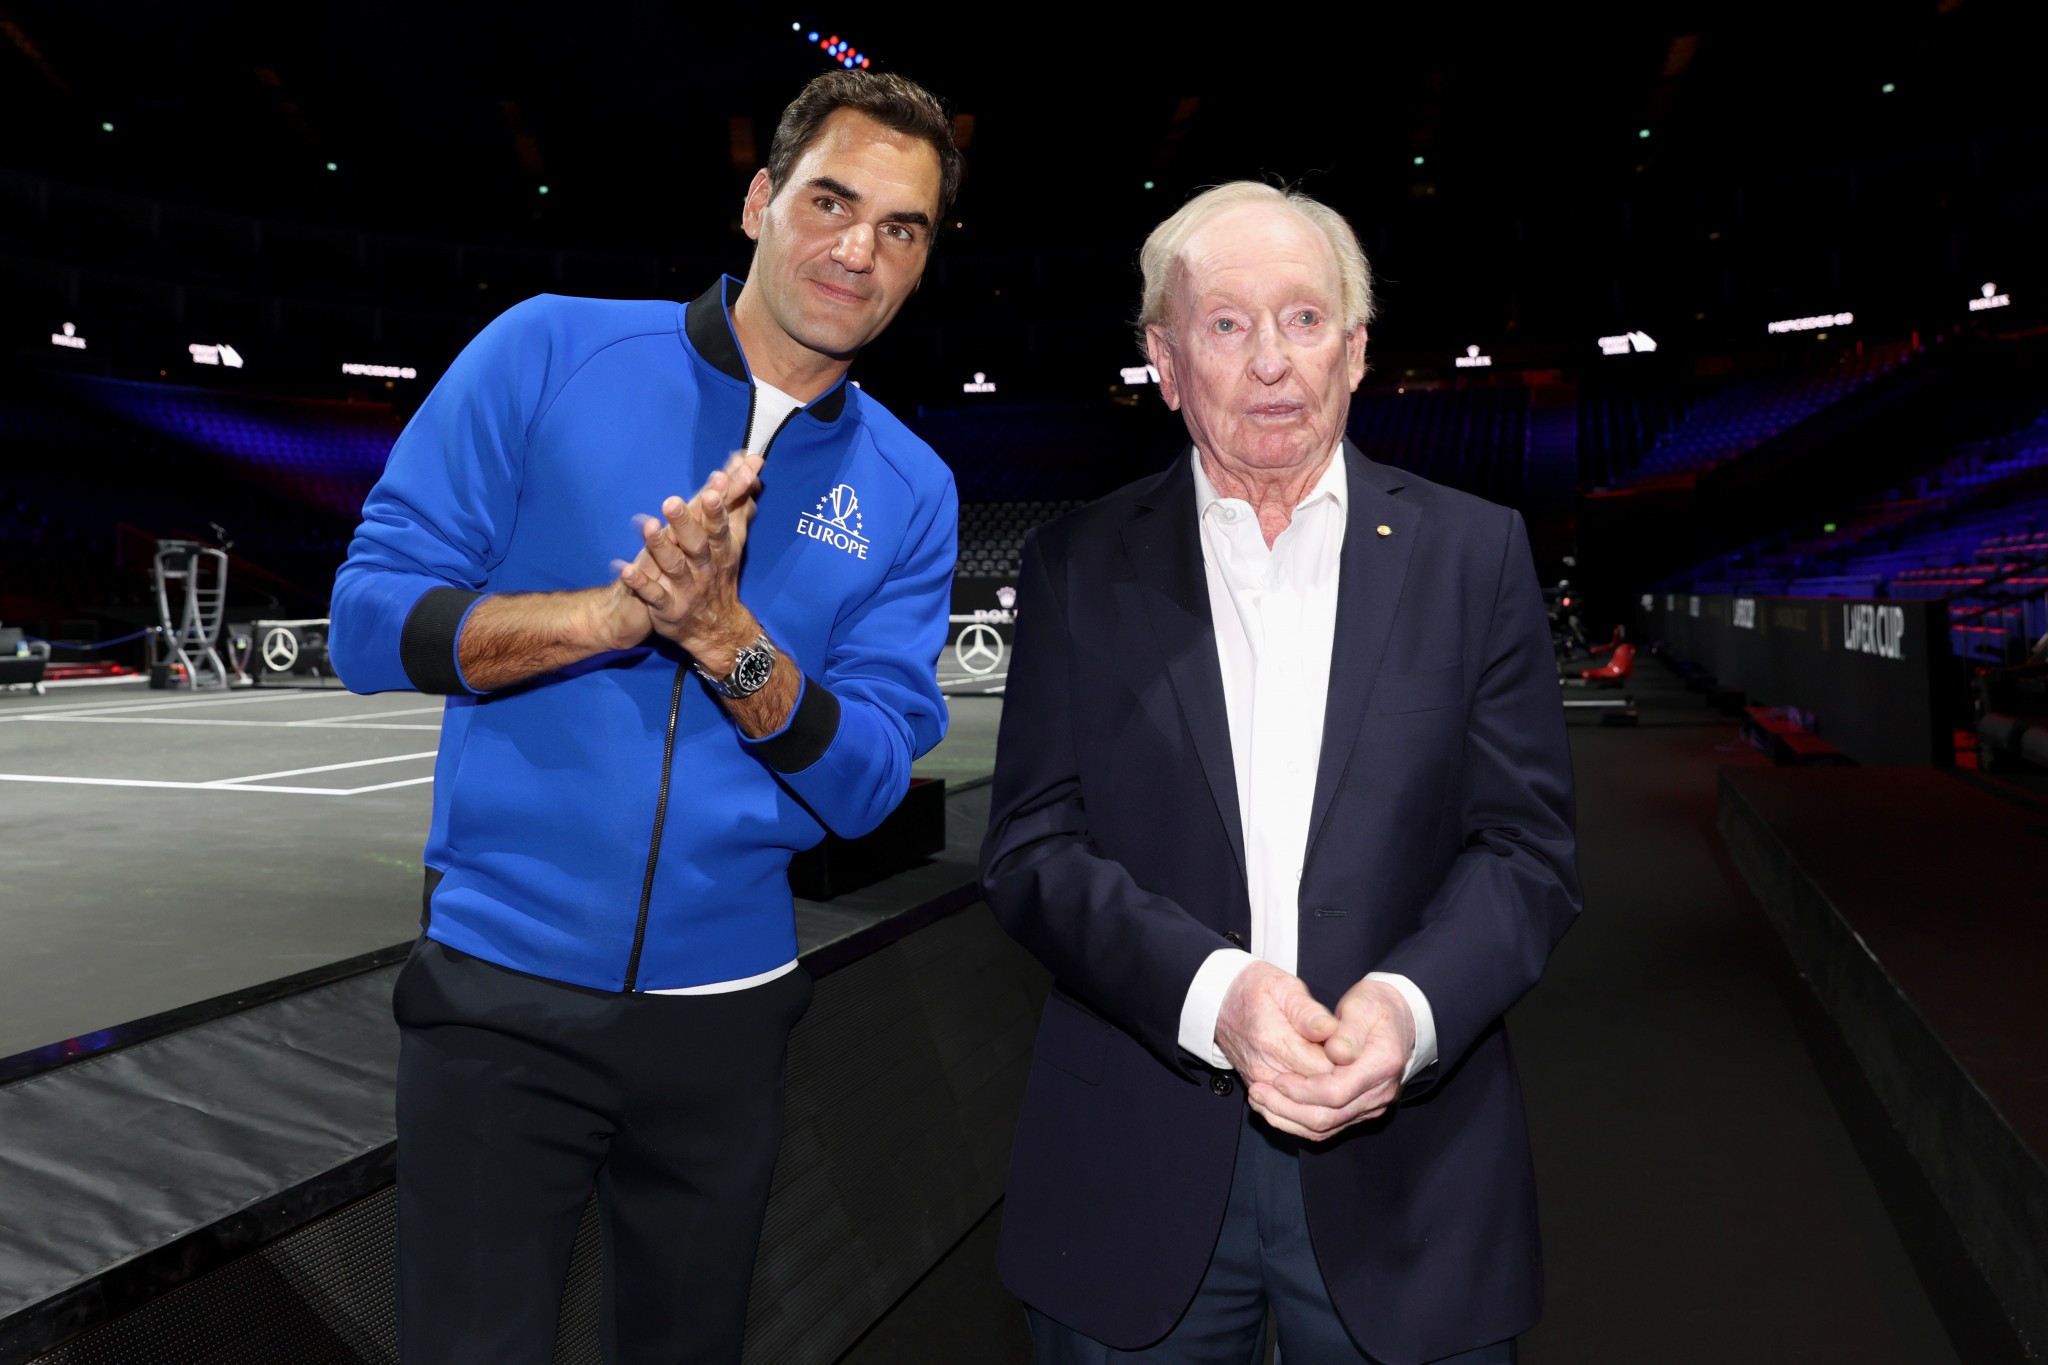 Roger Federer, left, with Rod Laver in London this week; the pair have 31 Grand Slam singles titles between them ©Getty Images